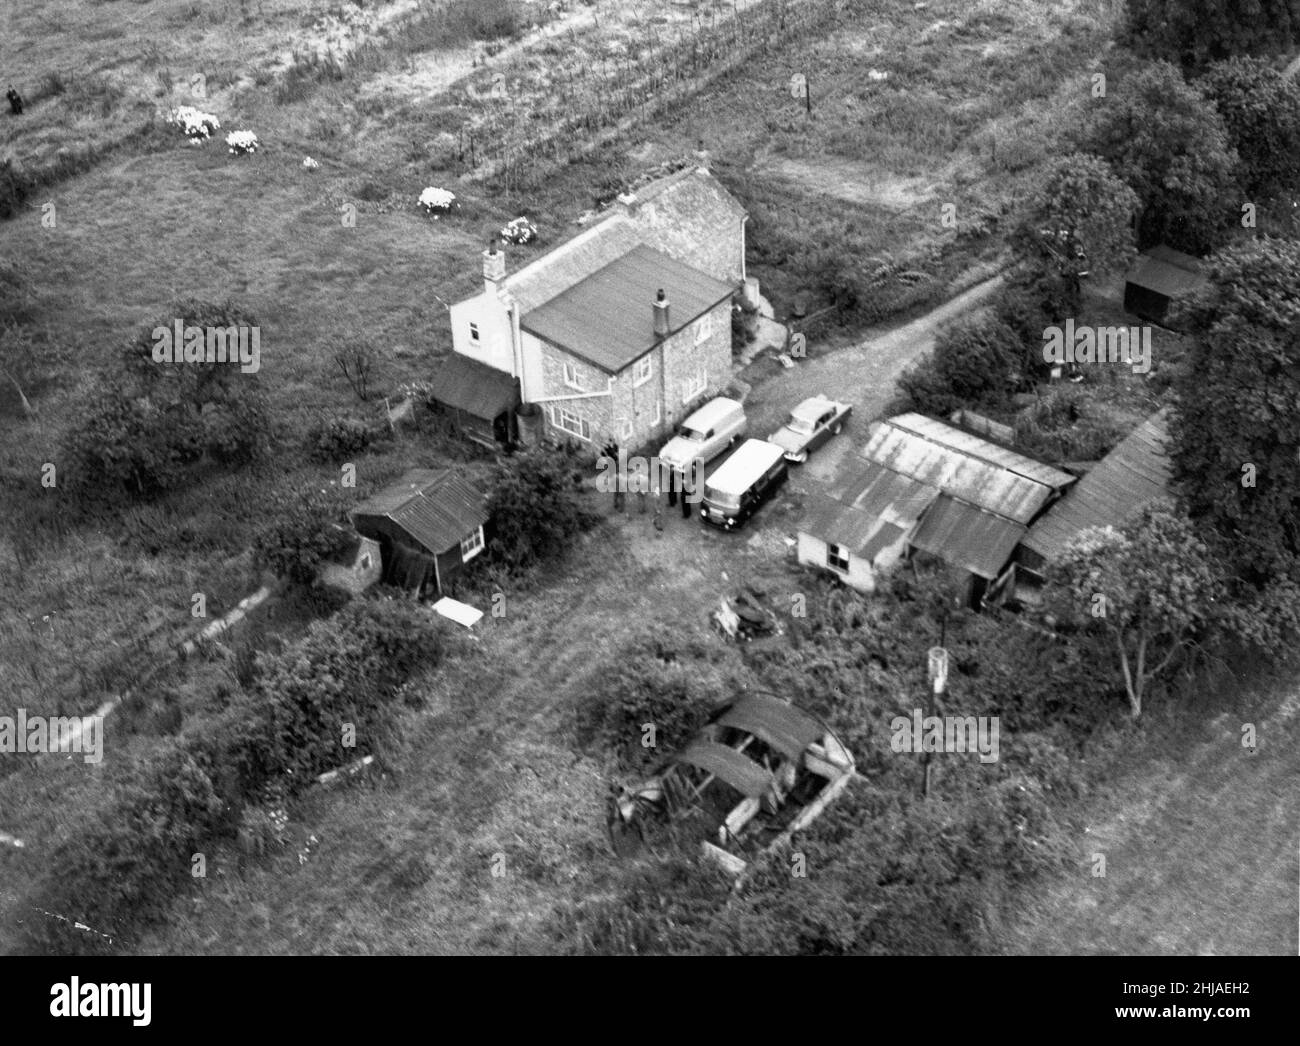 Leatherslade Farm at Oakley Buckinghamshire, where the Great Train Robbers hid. 13th August 1963. OPS Aerial view of the farmhouse Stock Photo